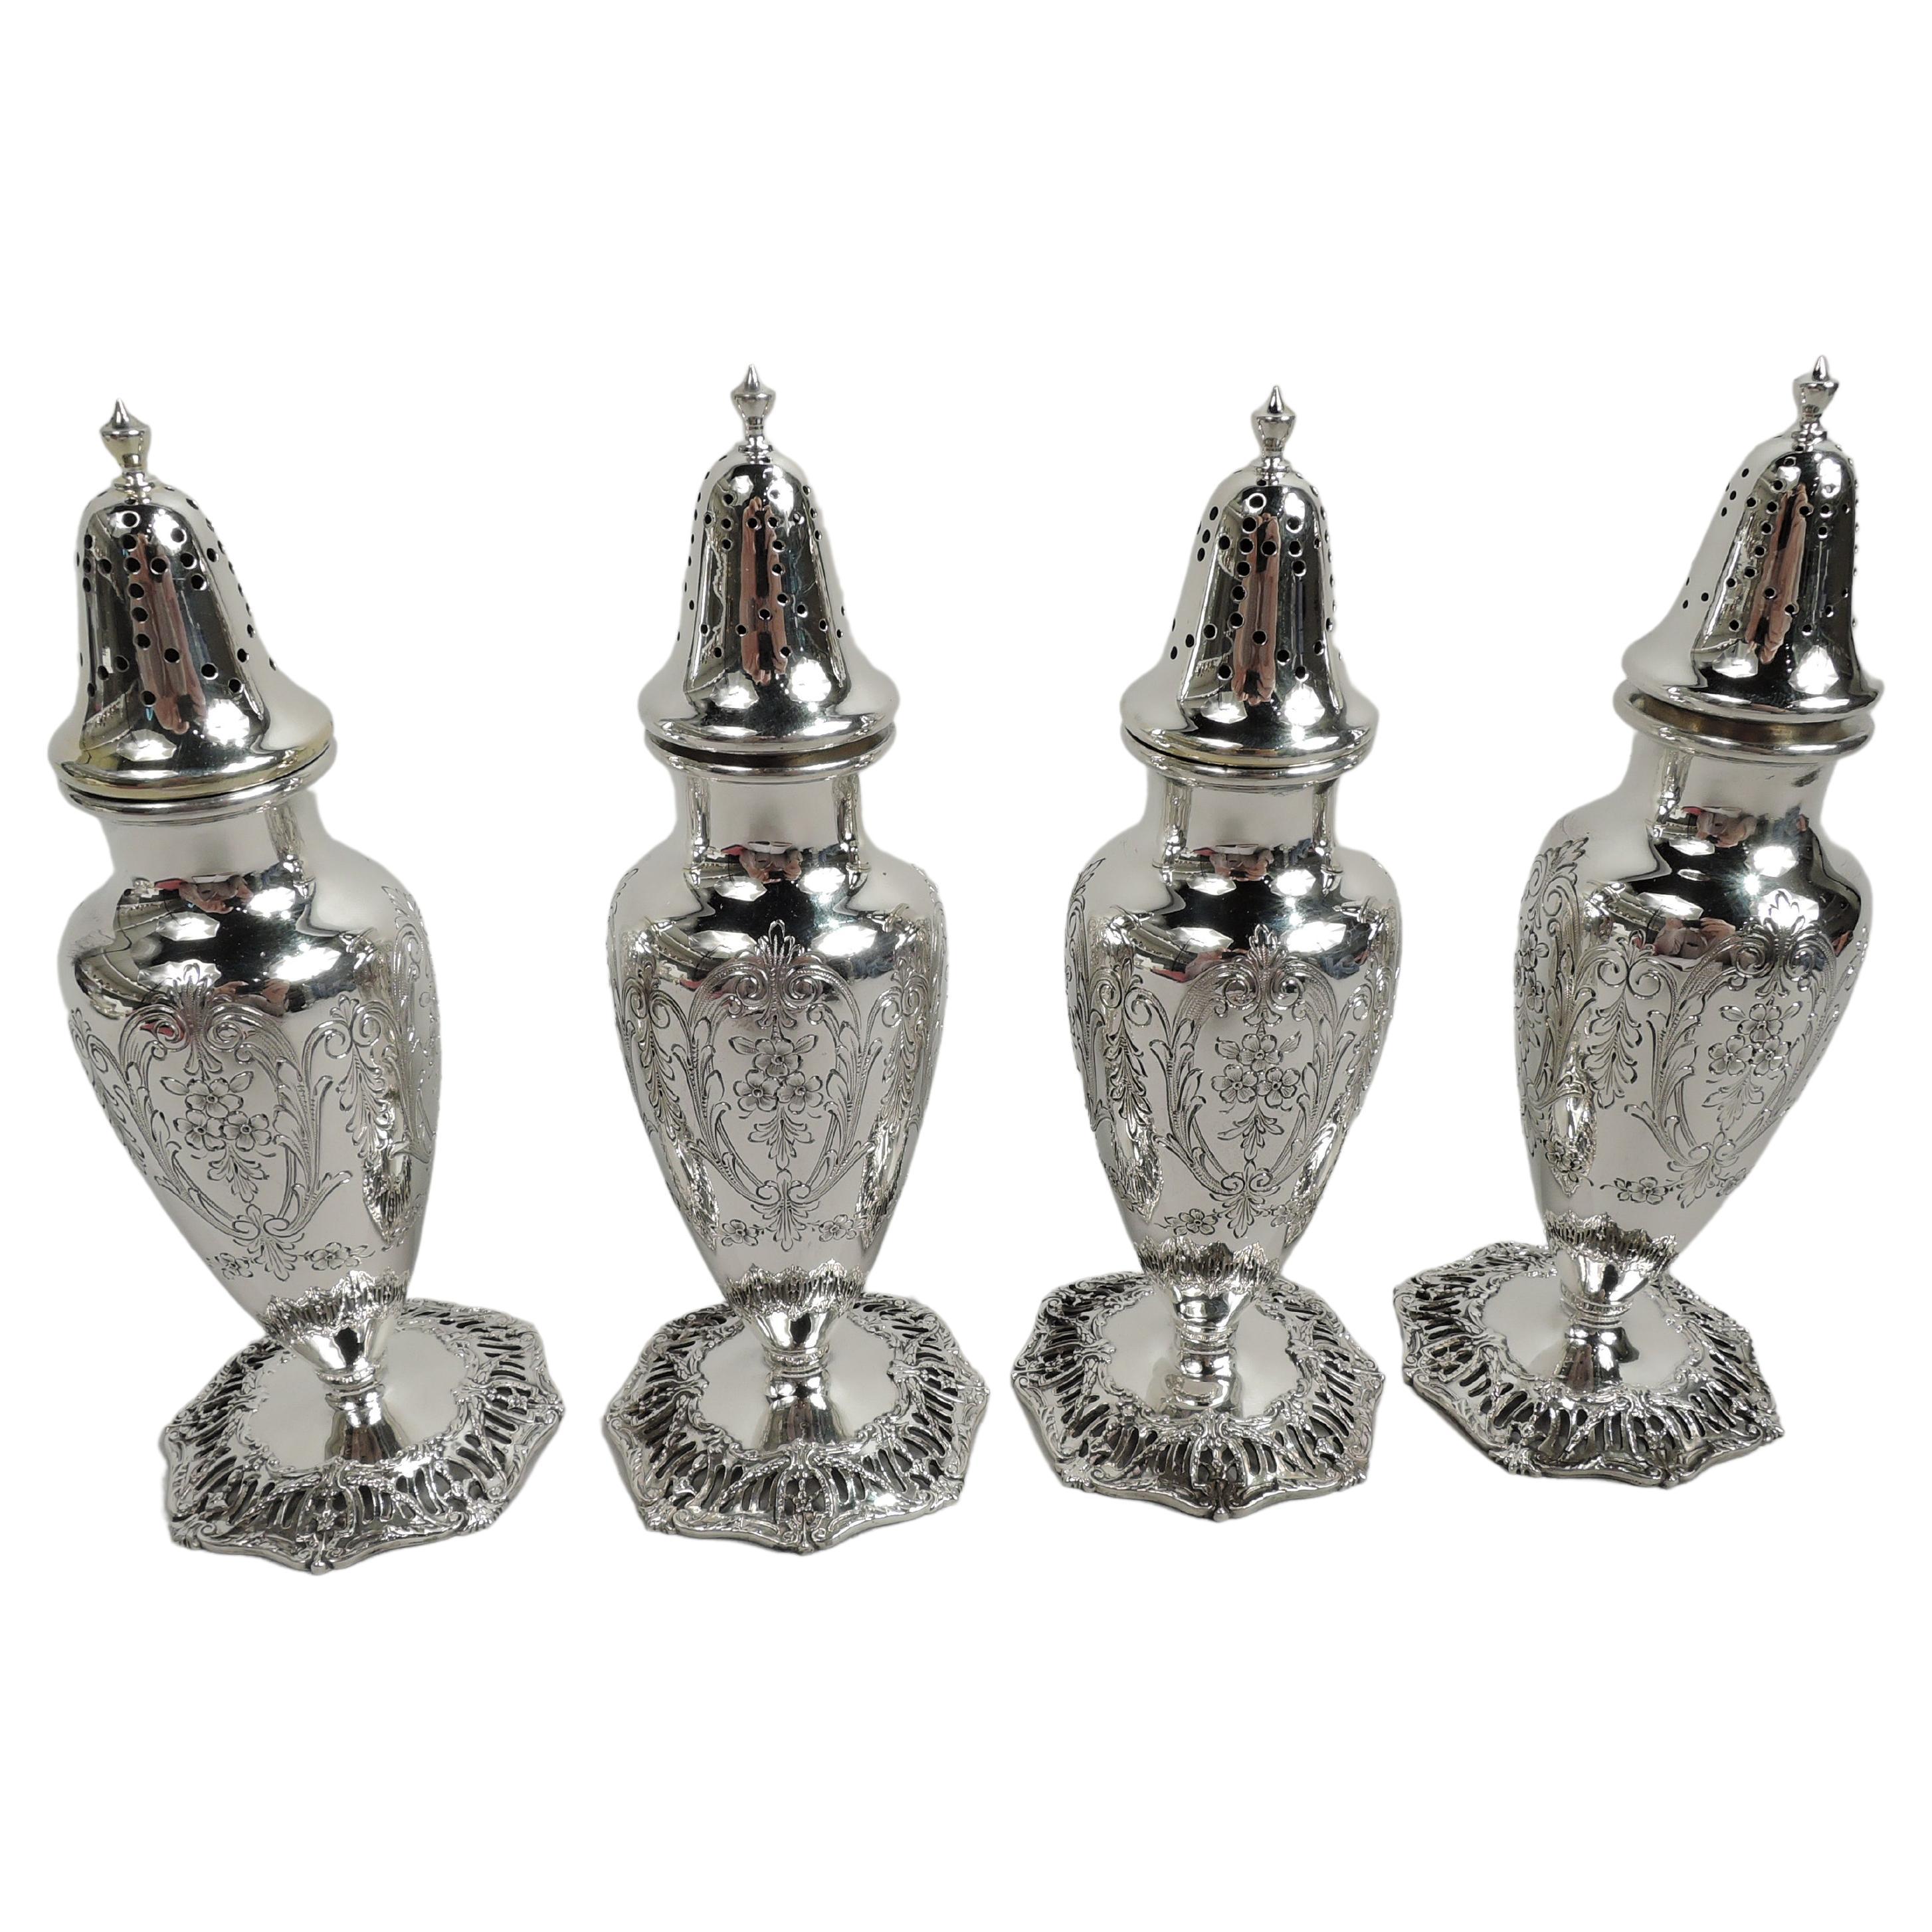 Two Pairs of Antique Edwardian Regency Sterling Silver Salt & Pepper Shakers For Sale